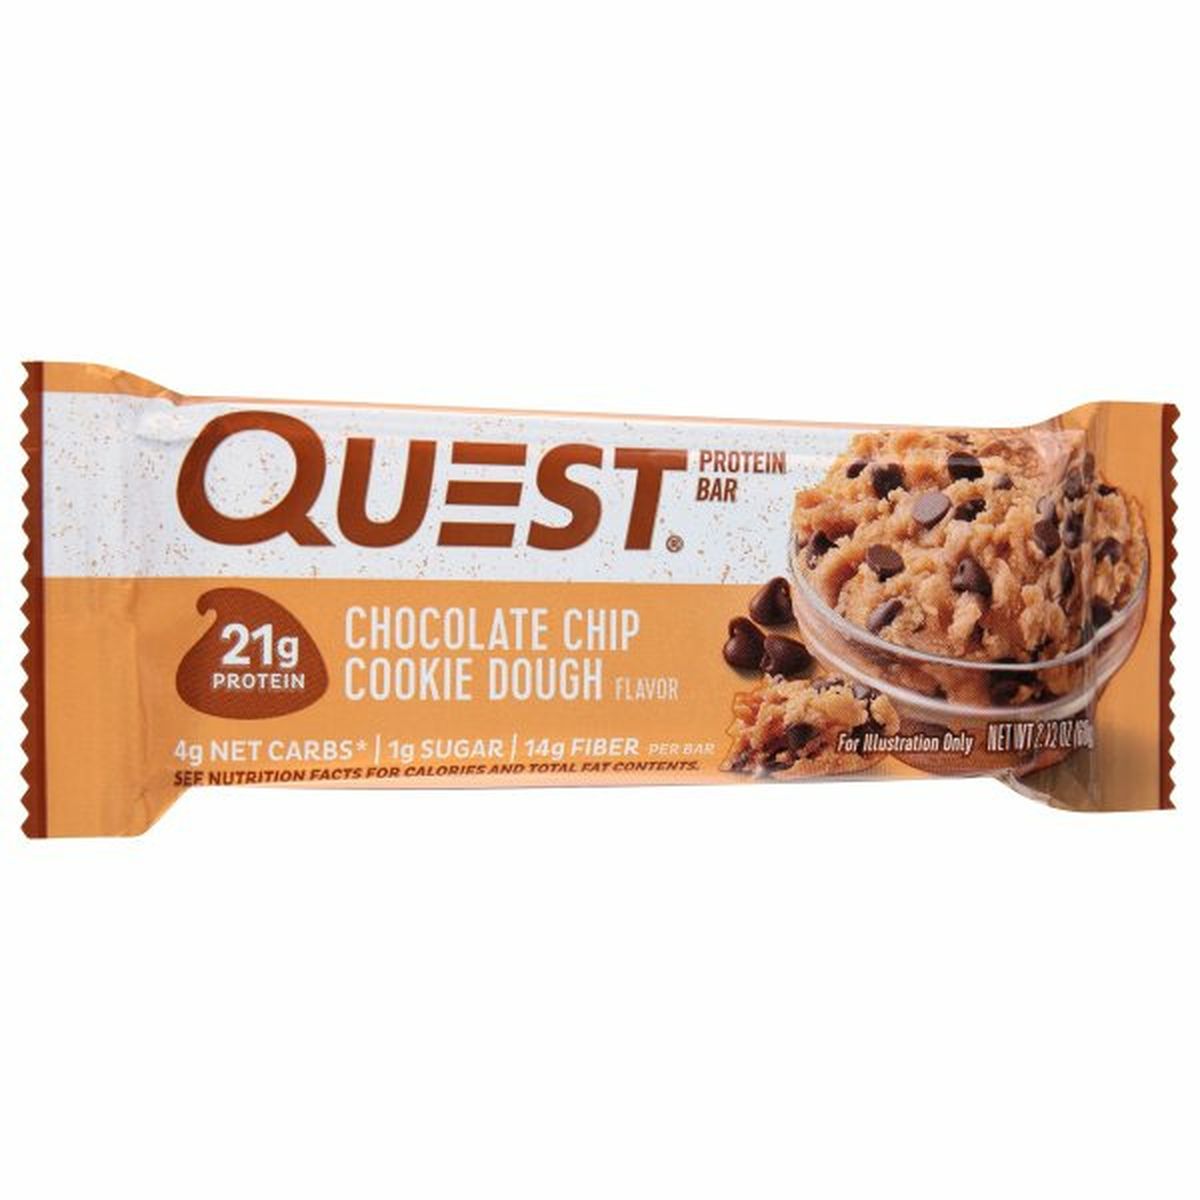 Calories in Quest Protein Bar, Chocolate Chip Cookie Dough Flavor